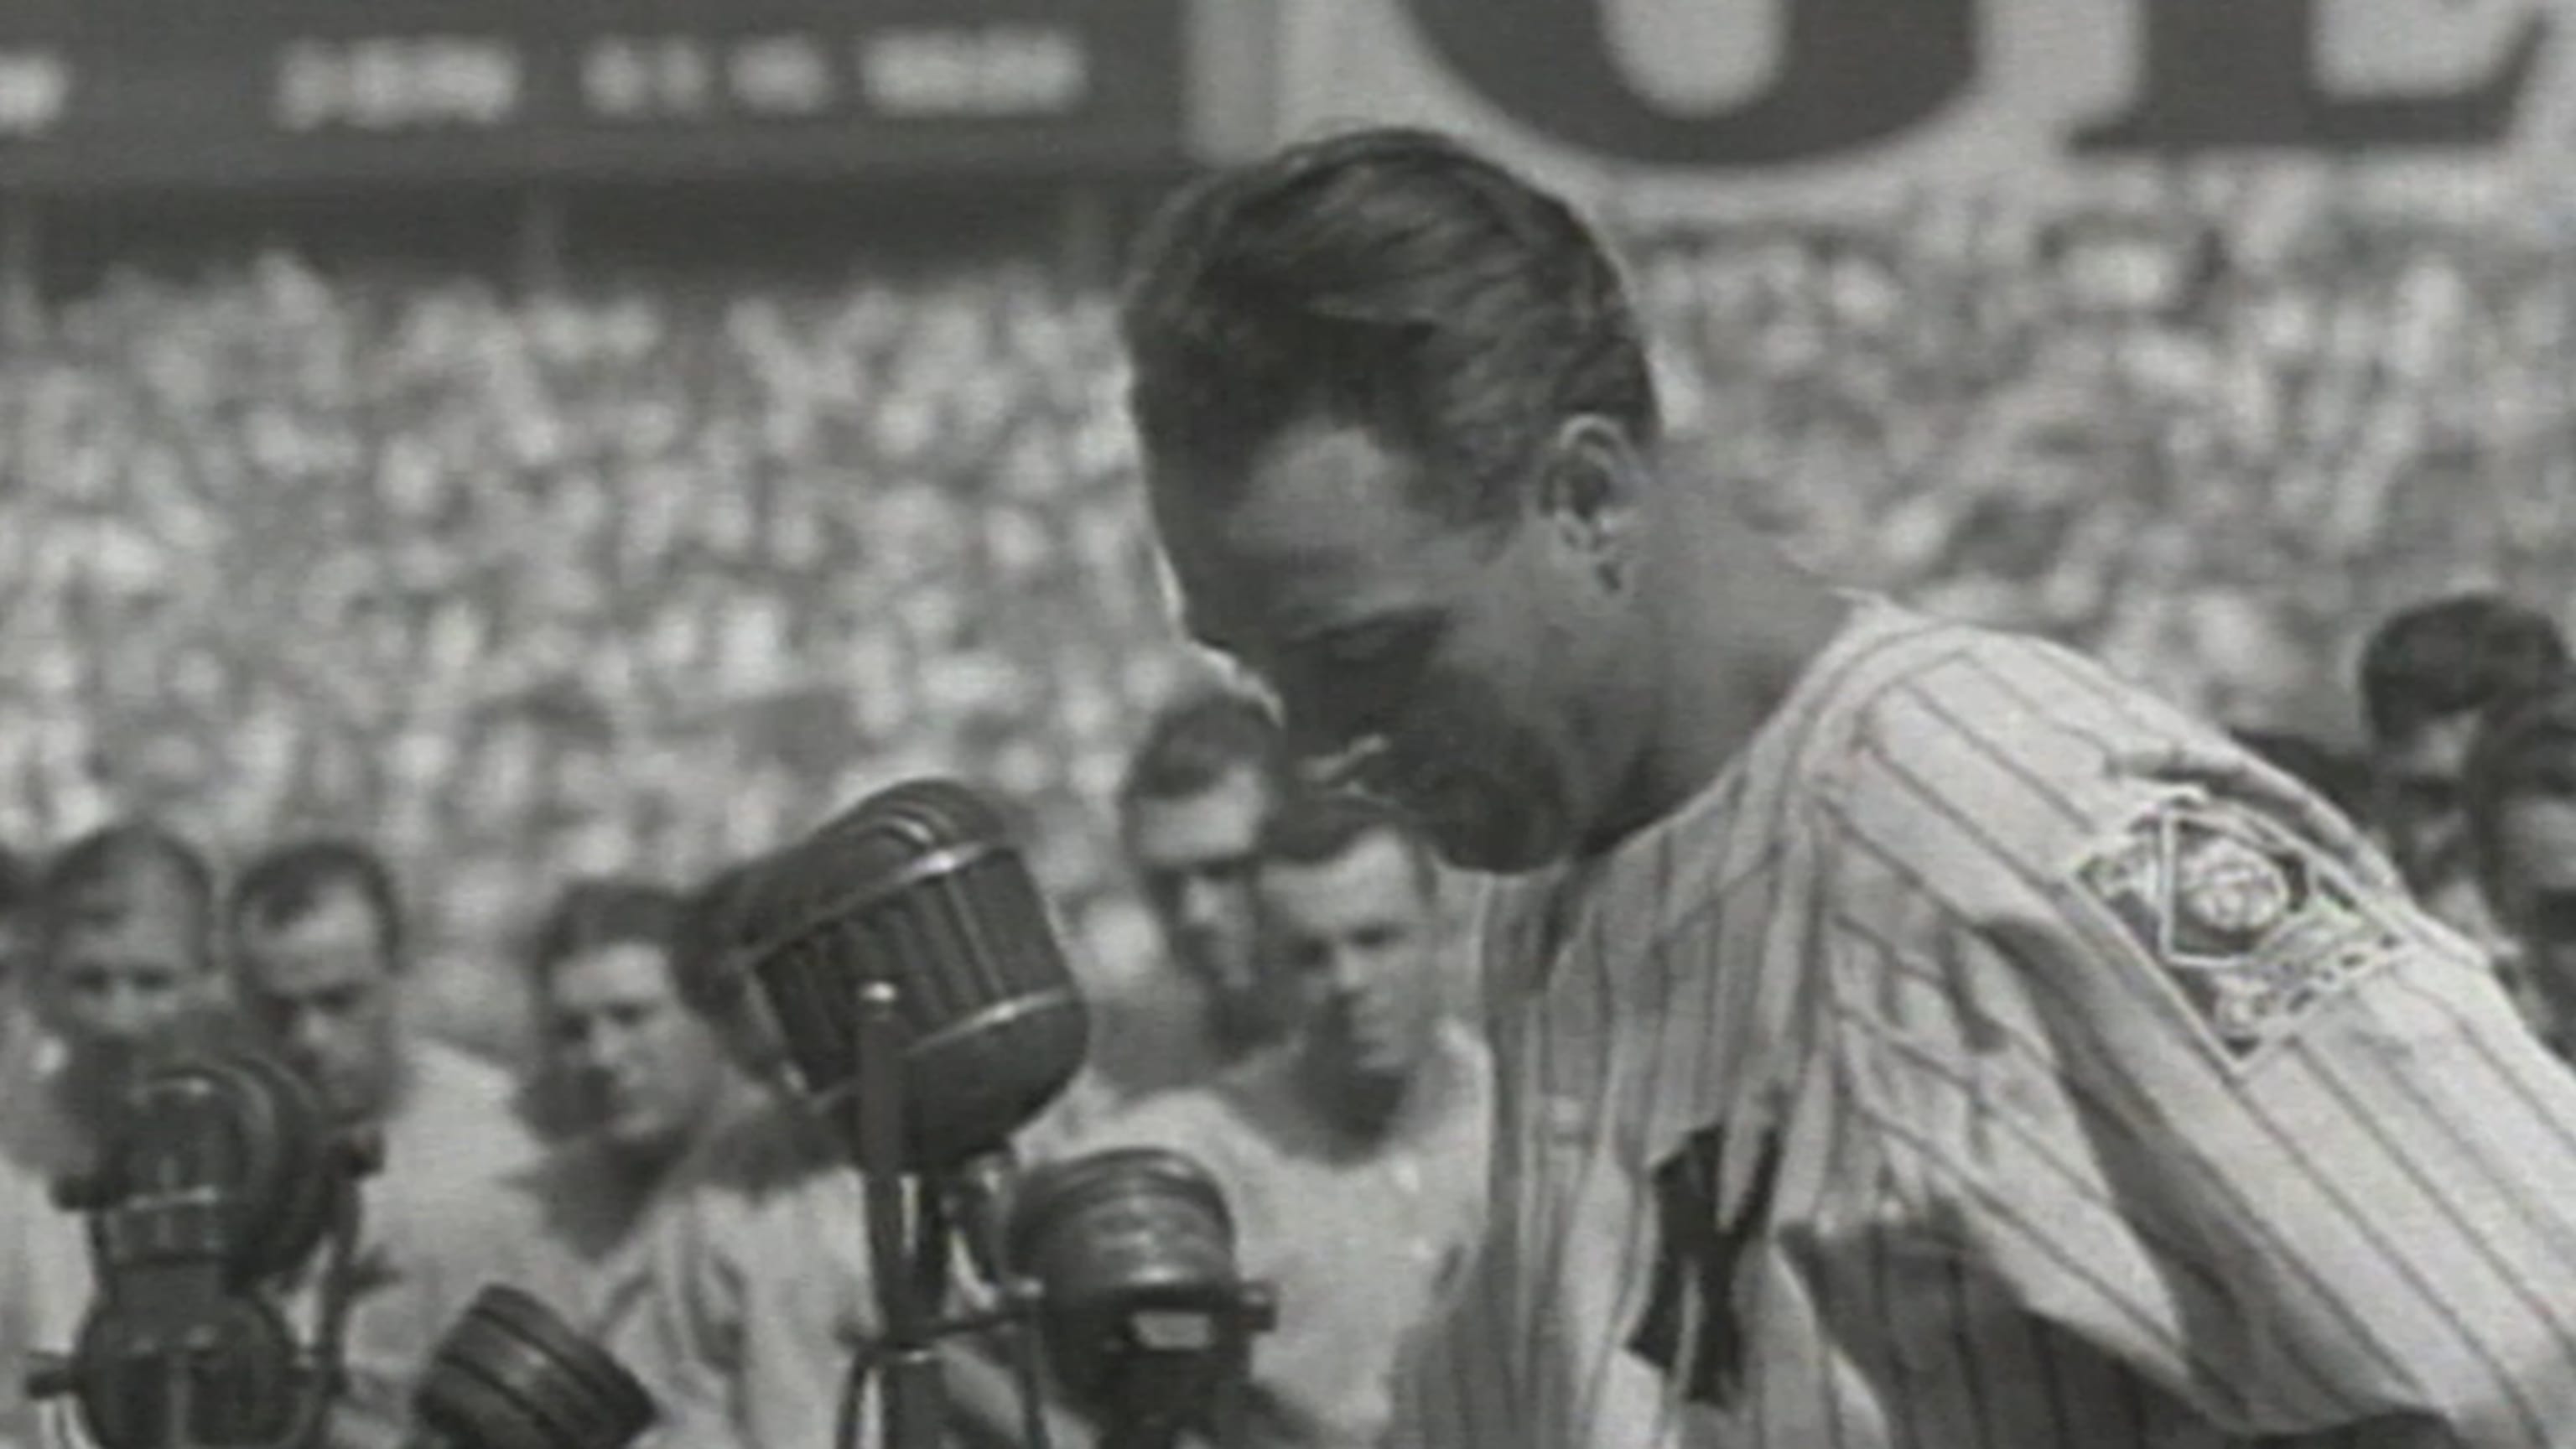 lou gehrig day 2022